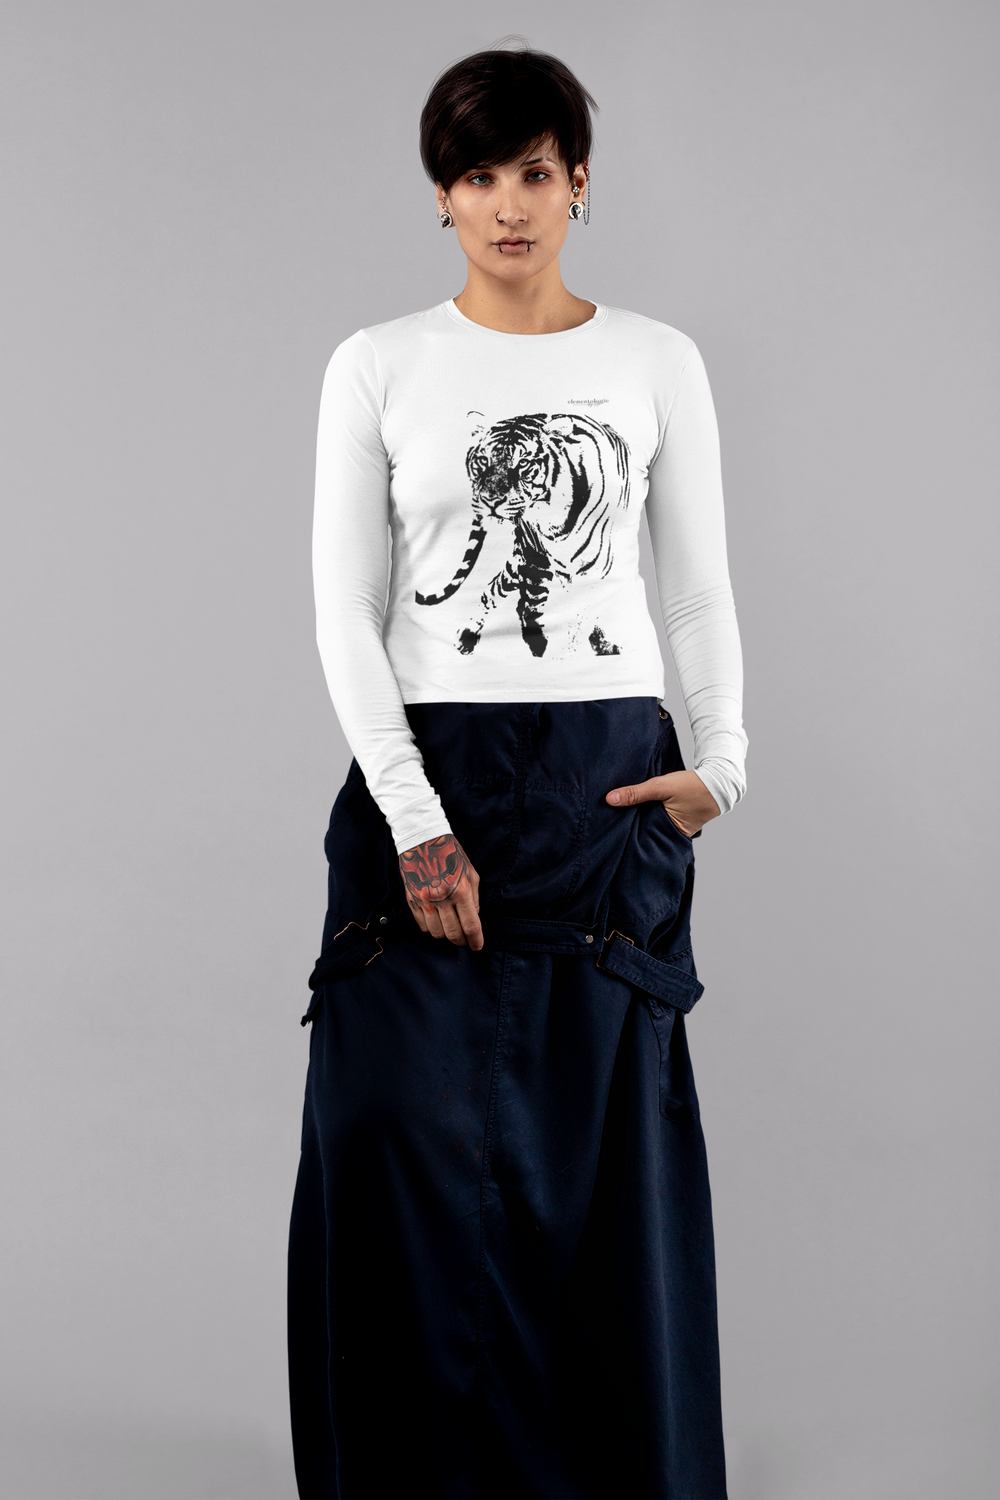 long-sleeve-tee-mockup-featuring-an-androgynous-woman-at-a-studio-32927.png